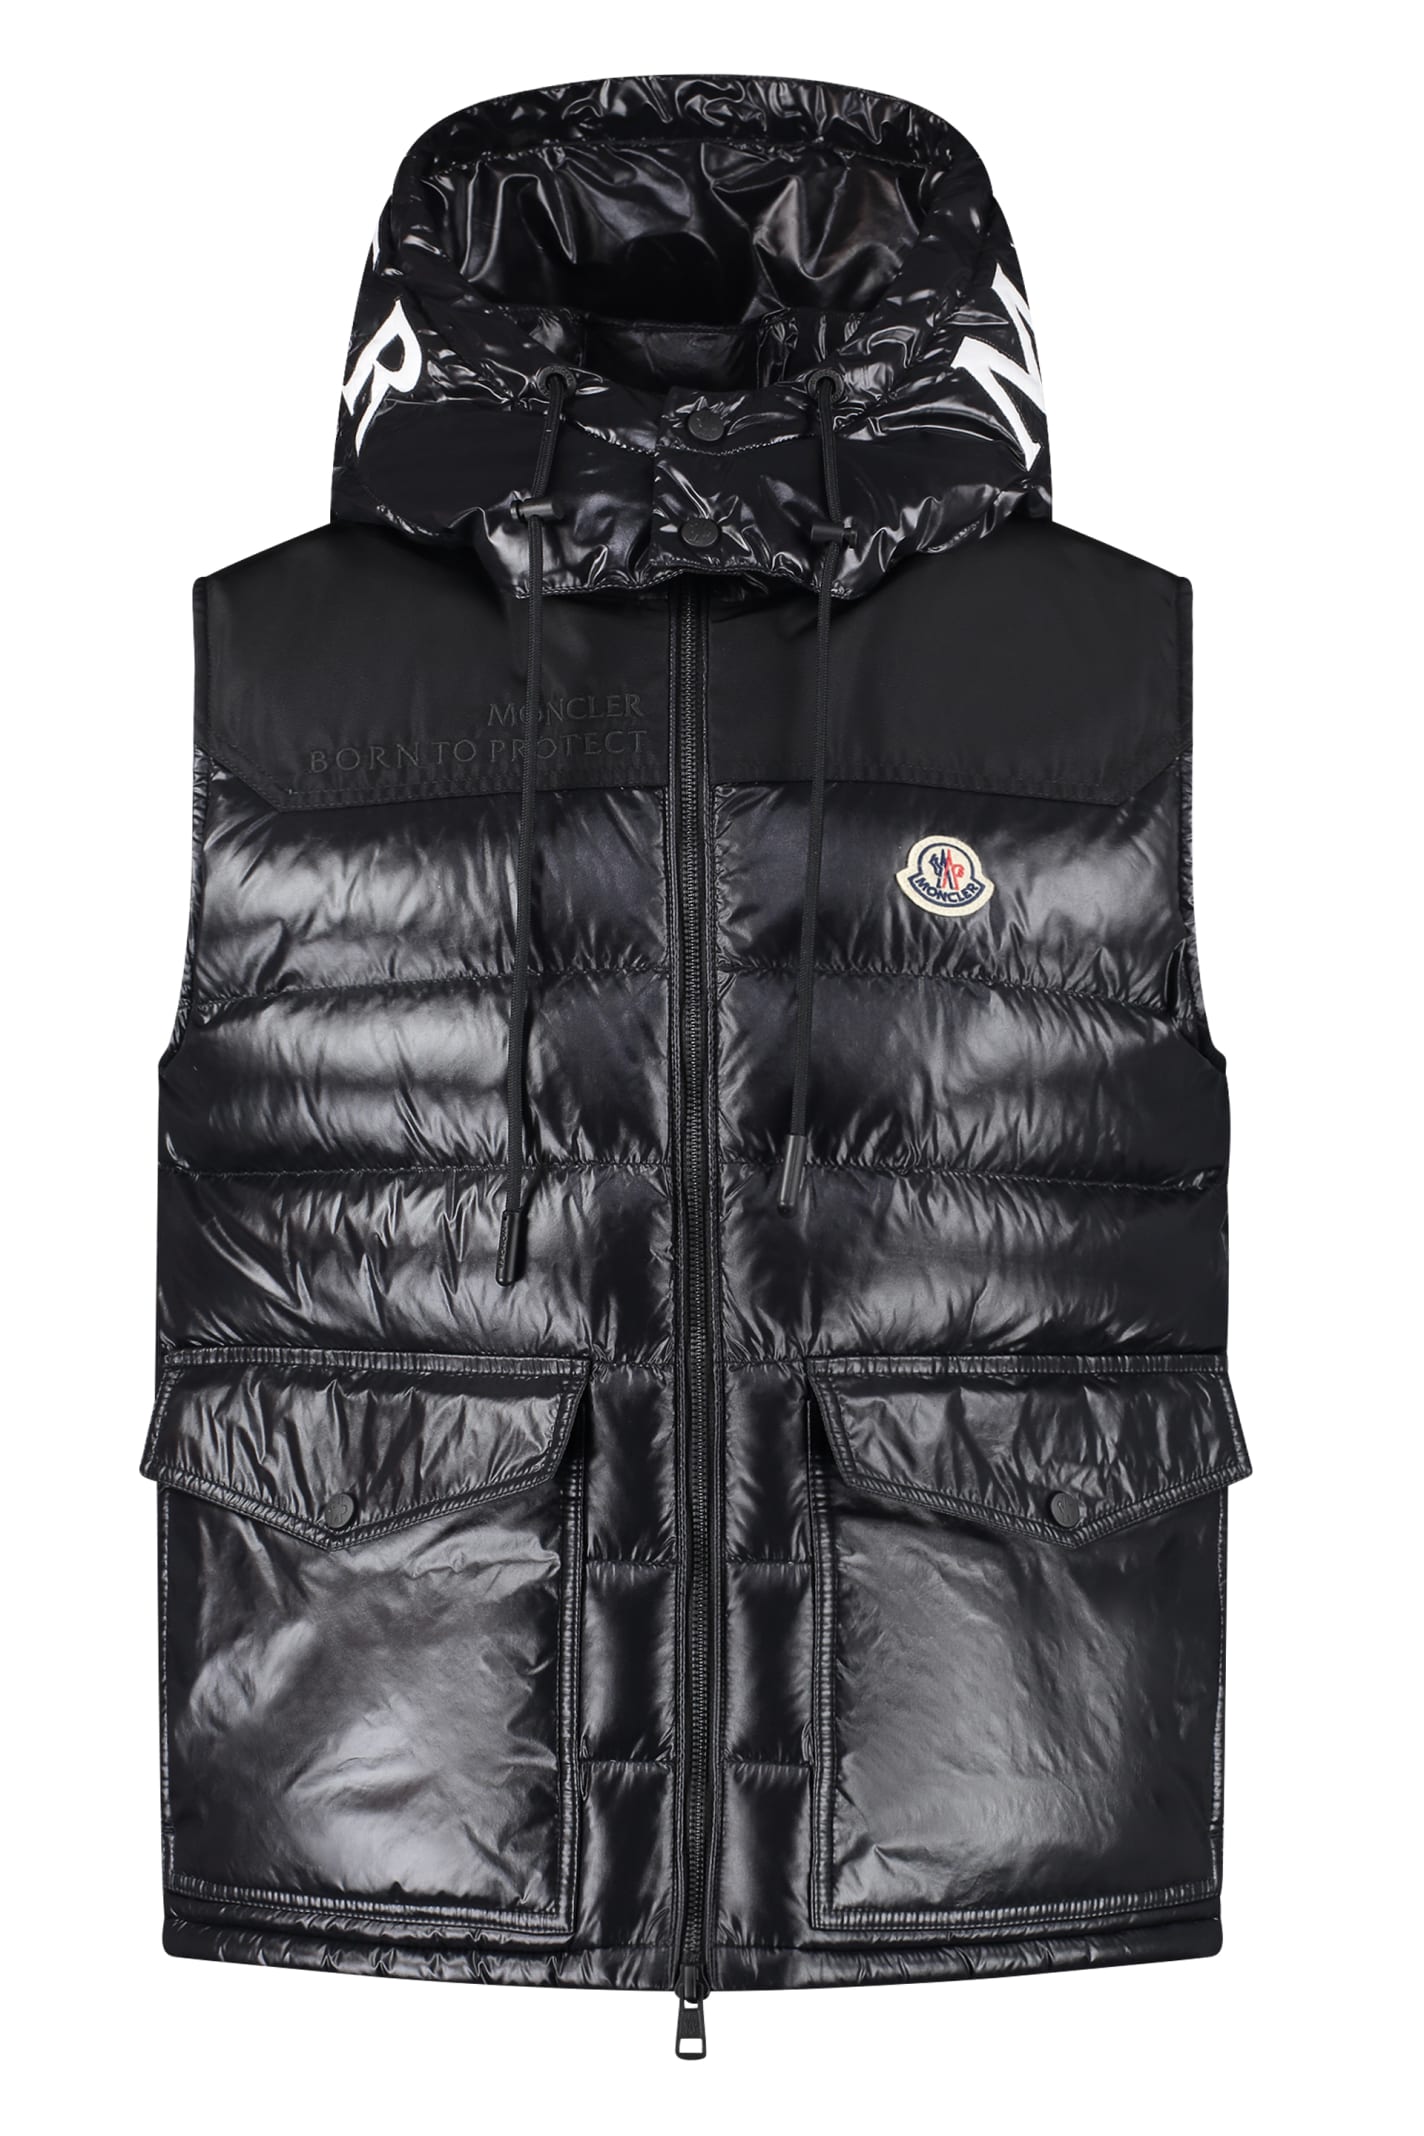 Moncler Born To Protect - Genichi Bodywarmer Jacket